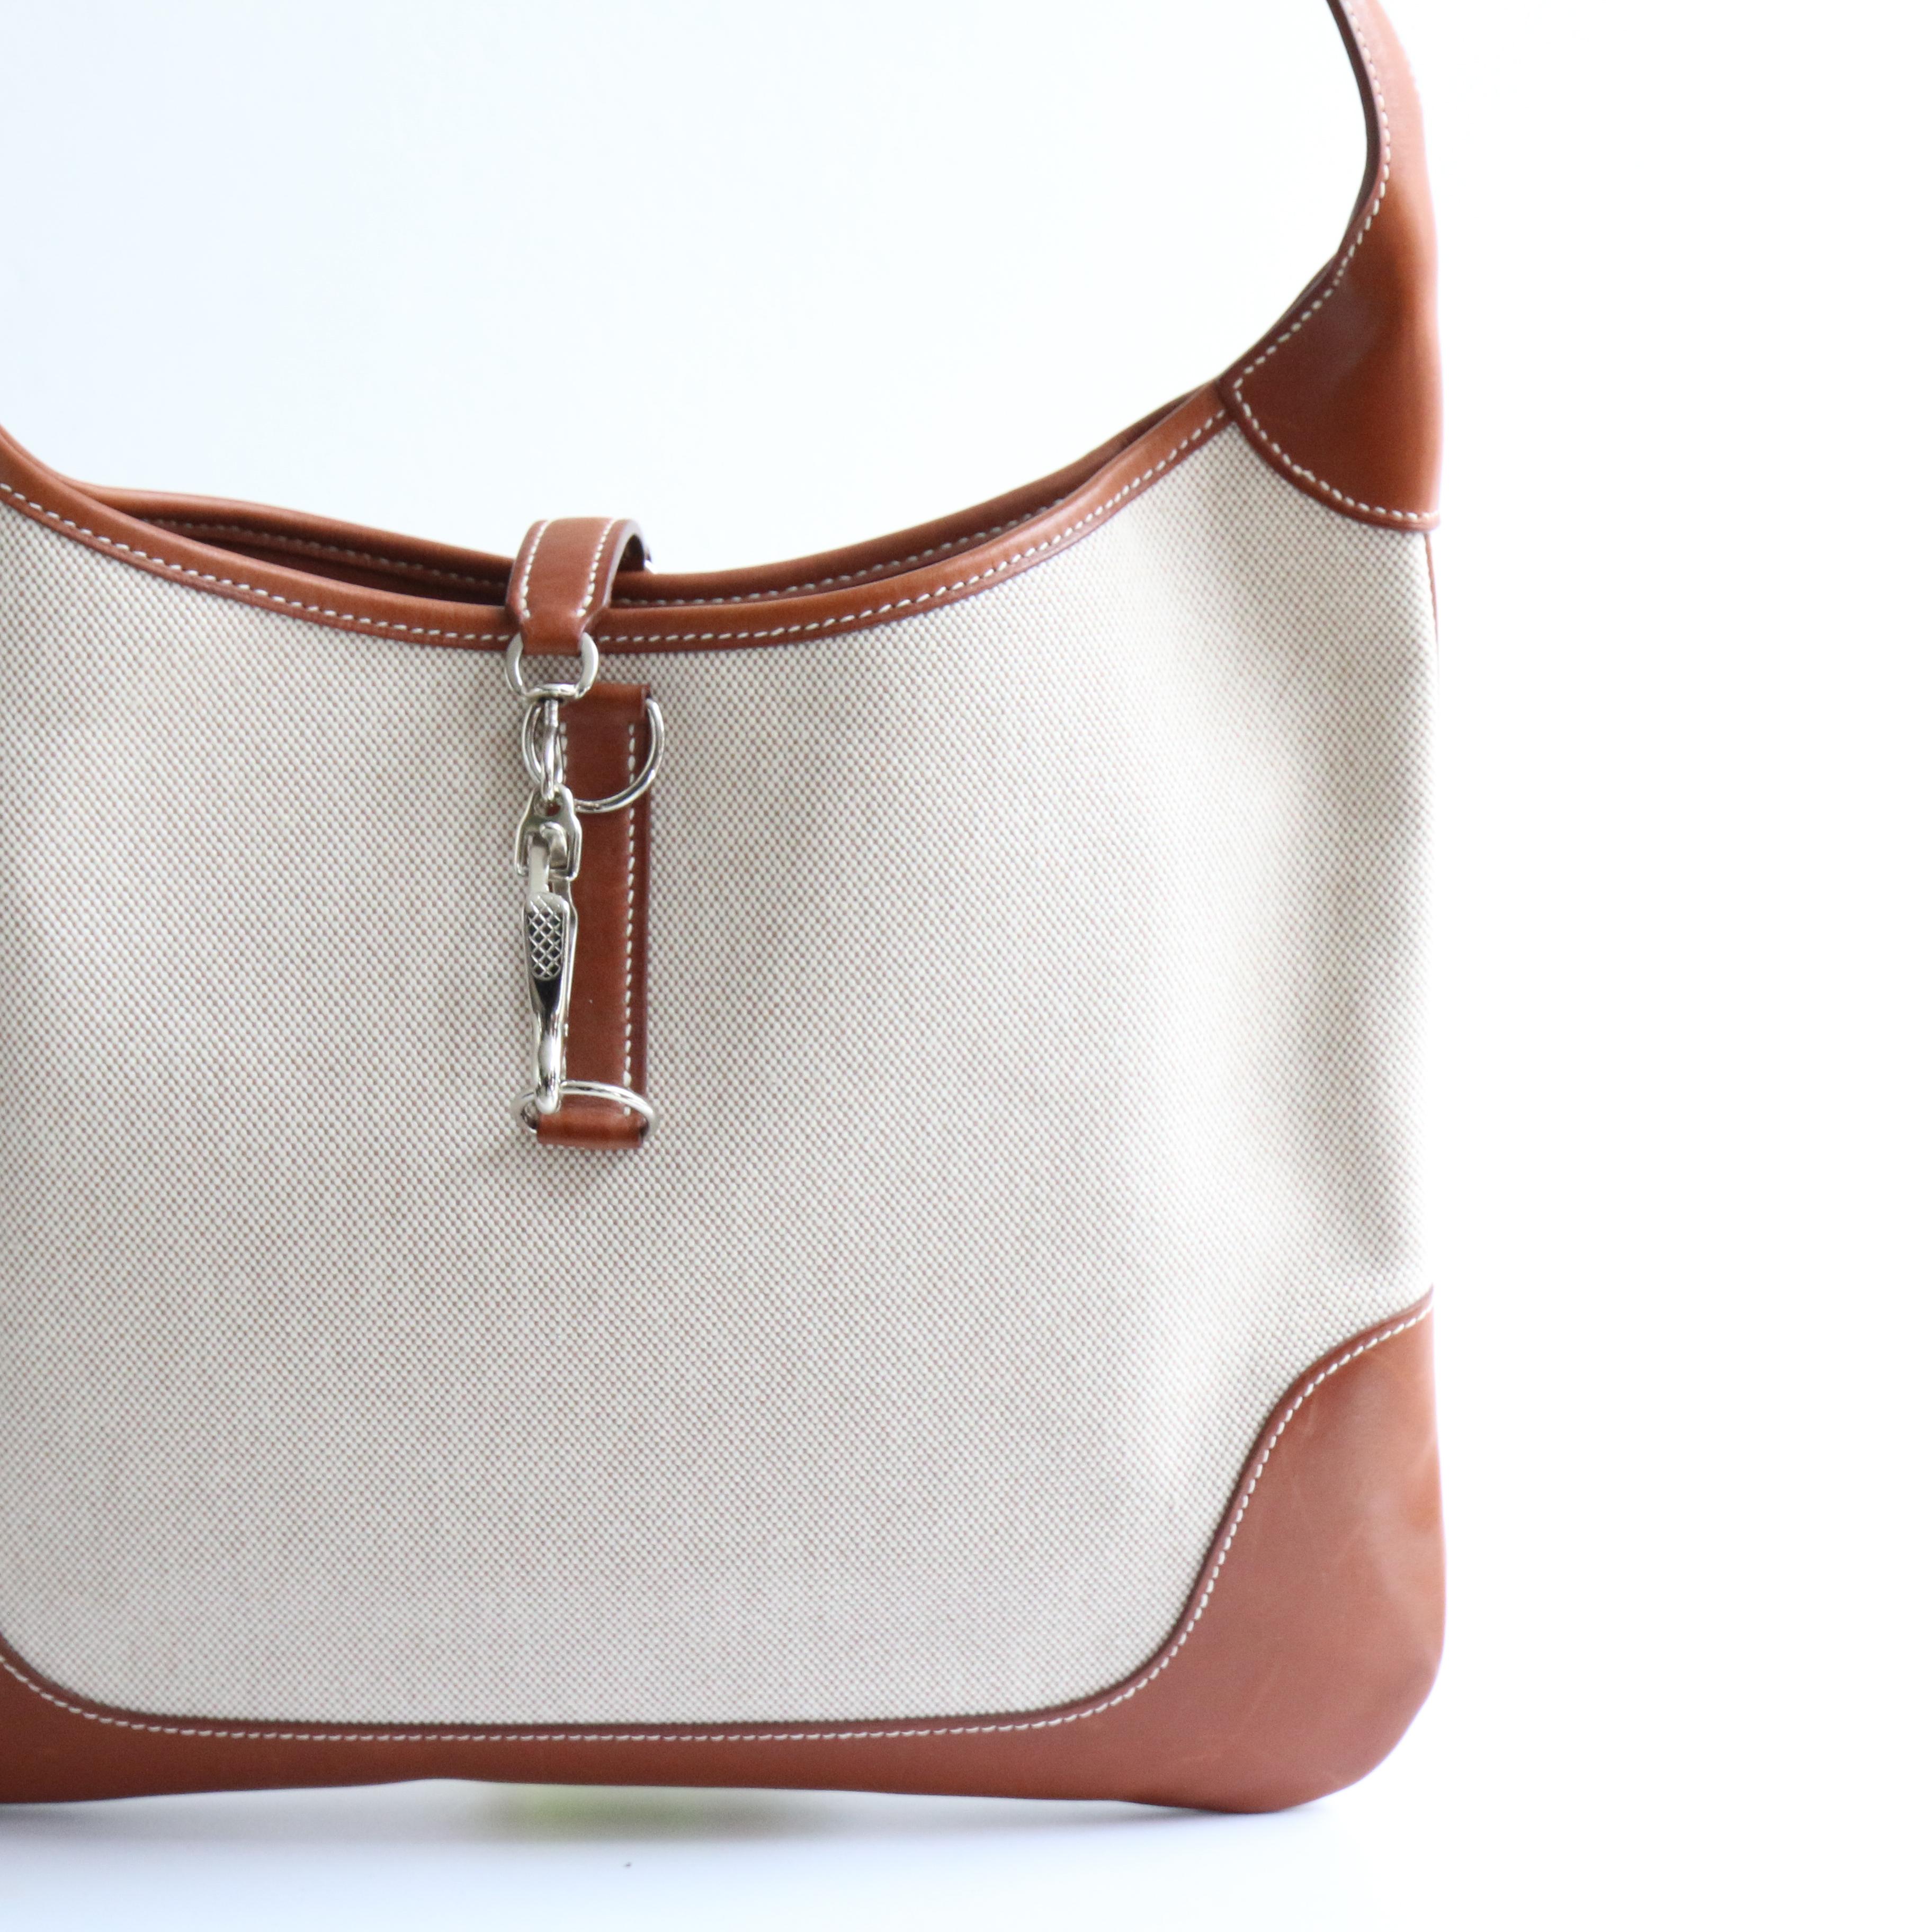 This wonderful canvas and tan coloured leather Hermès shoulder bag, accented by white stitching and iconic silver hardware is the perfect piece to elevate your everyday wardrobe.

Her adjustable tan leather shoulder strap, frames the saddle cut of